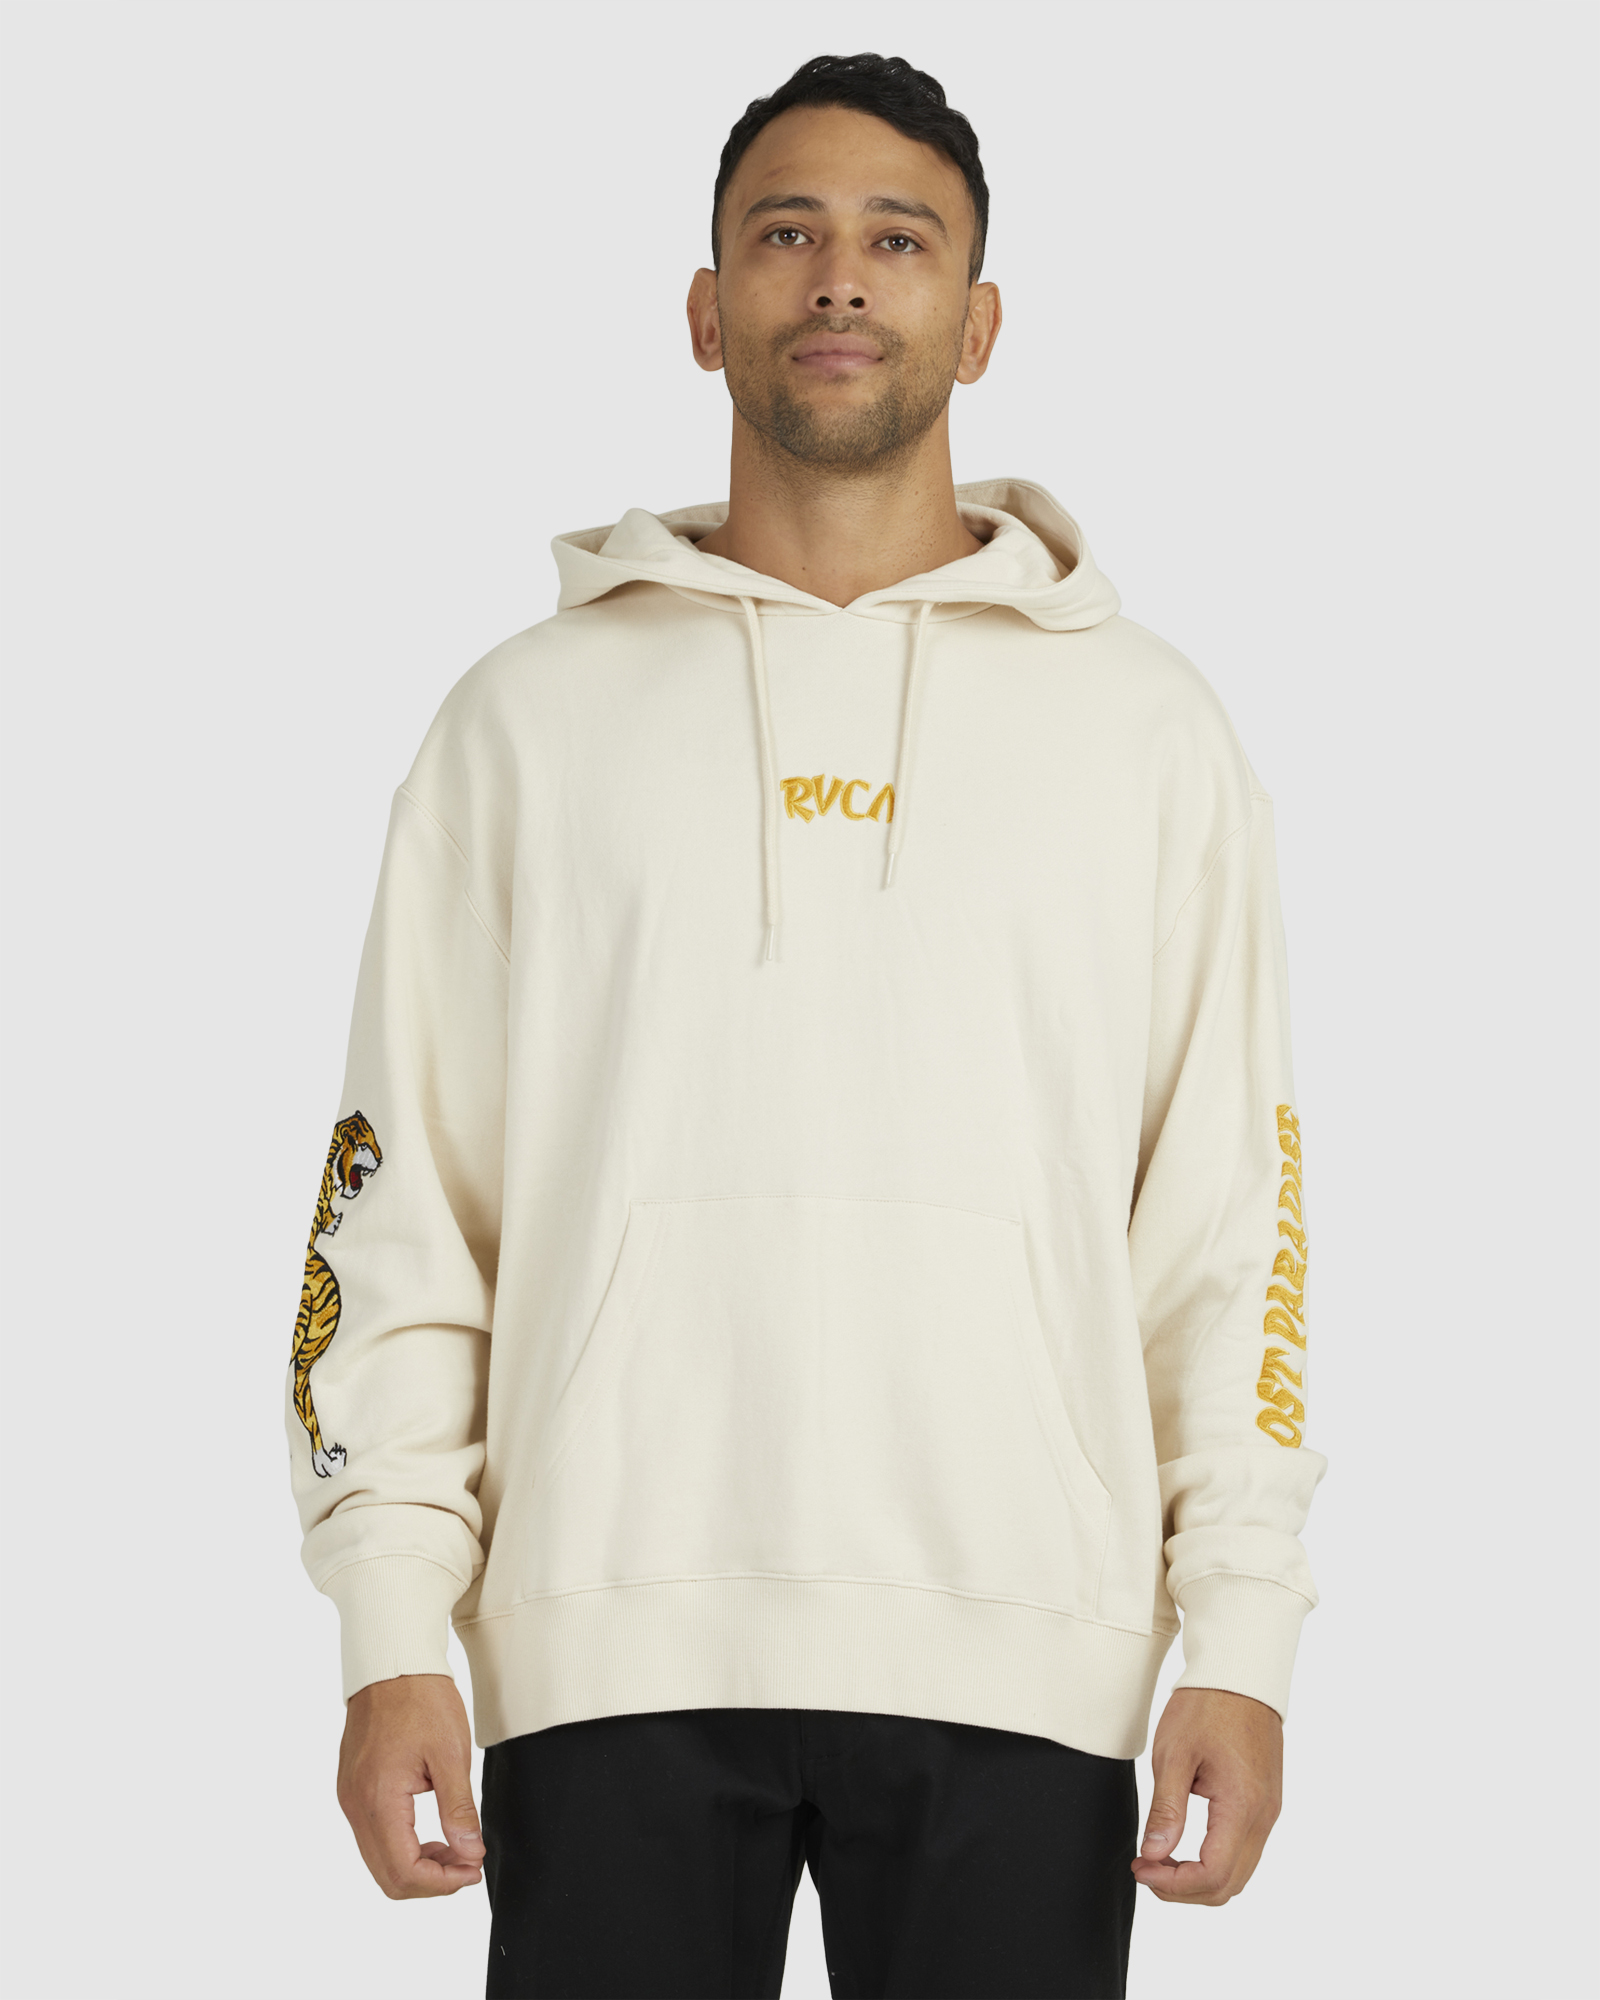 Rvca Lost Paradise Hoodie - Natural | SurfStitch